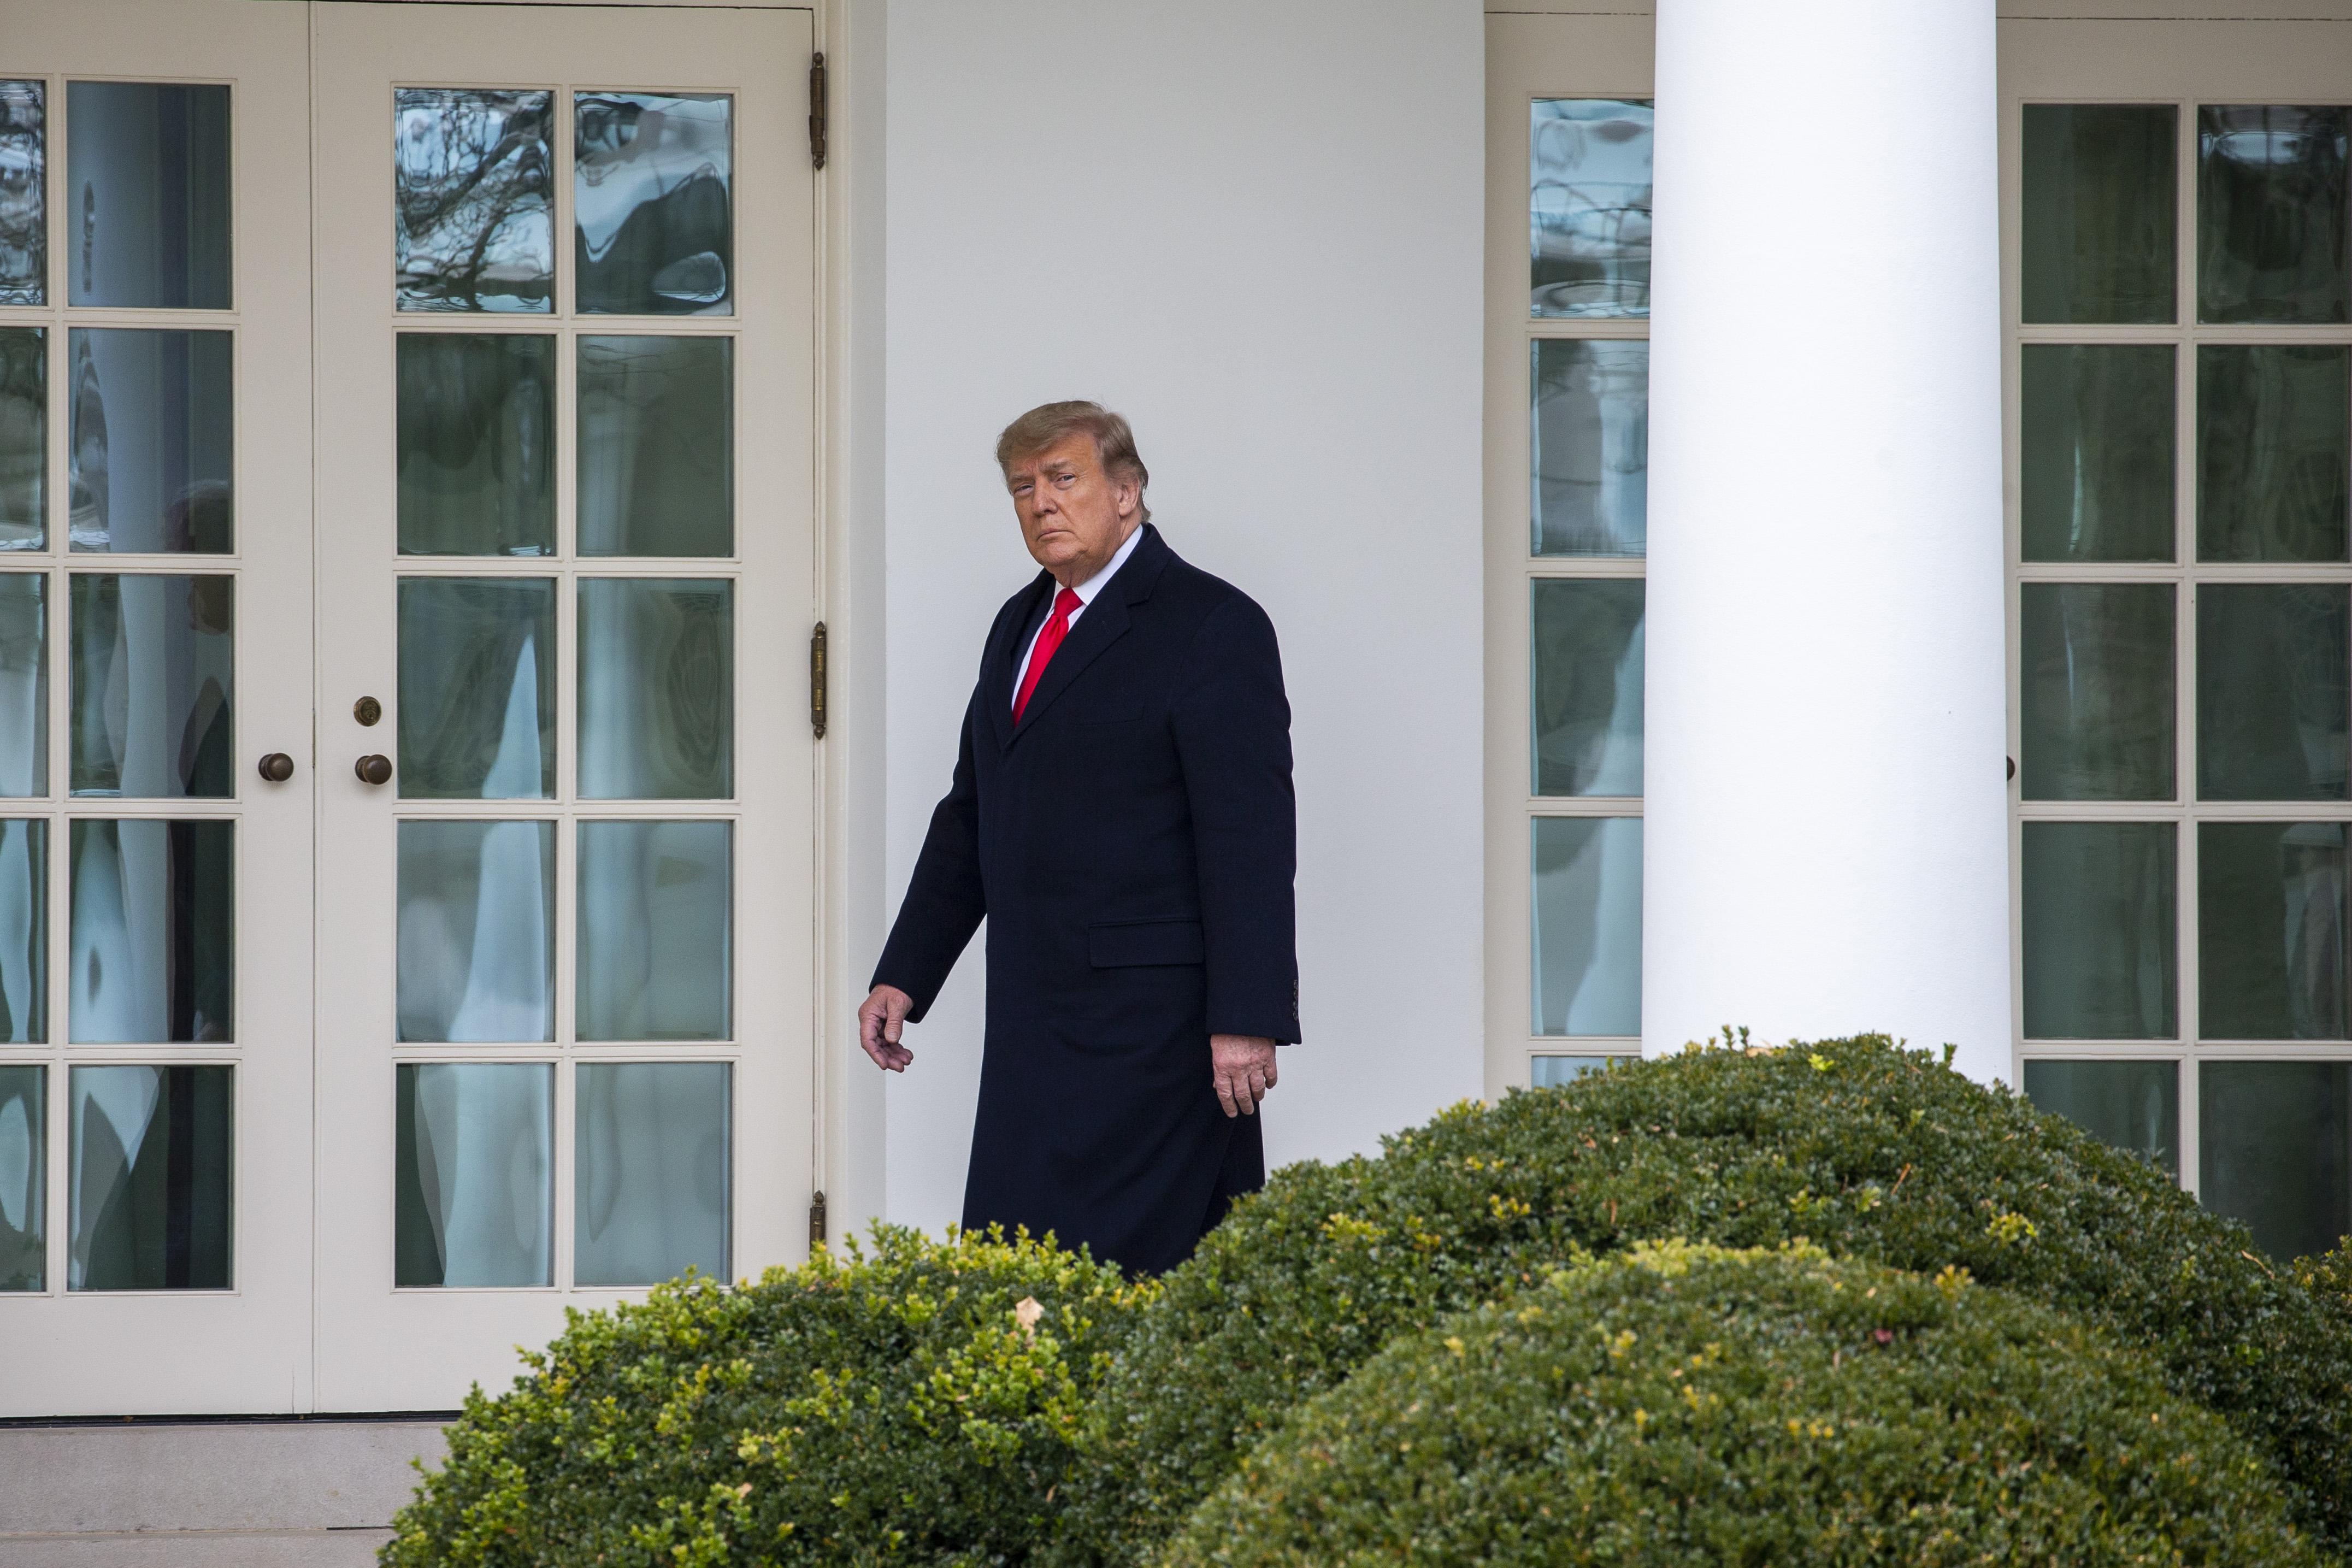 Trump frowning toward the camera as he walks in an overcoat on the White House colonnade